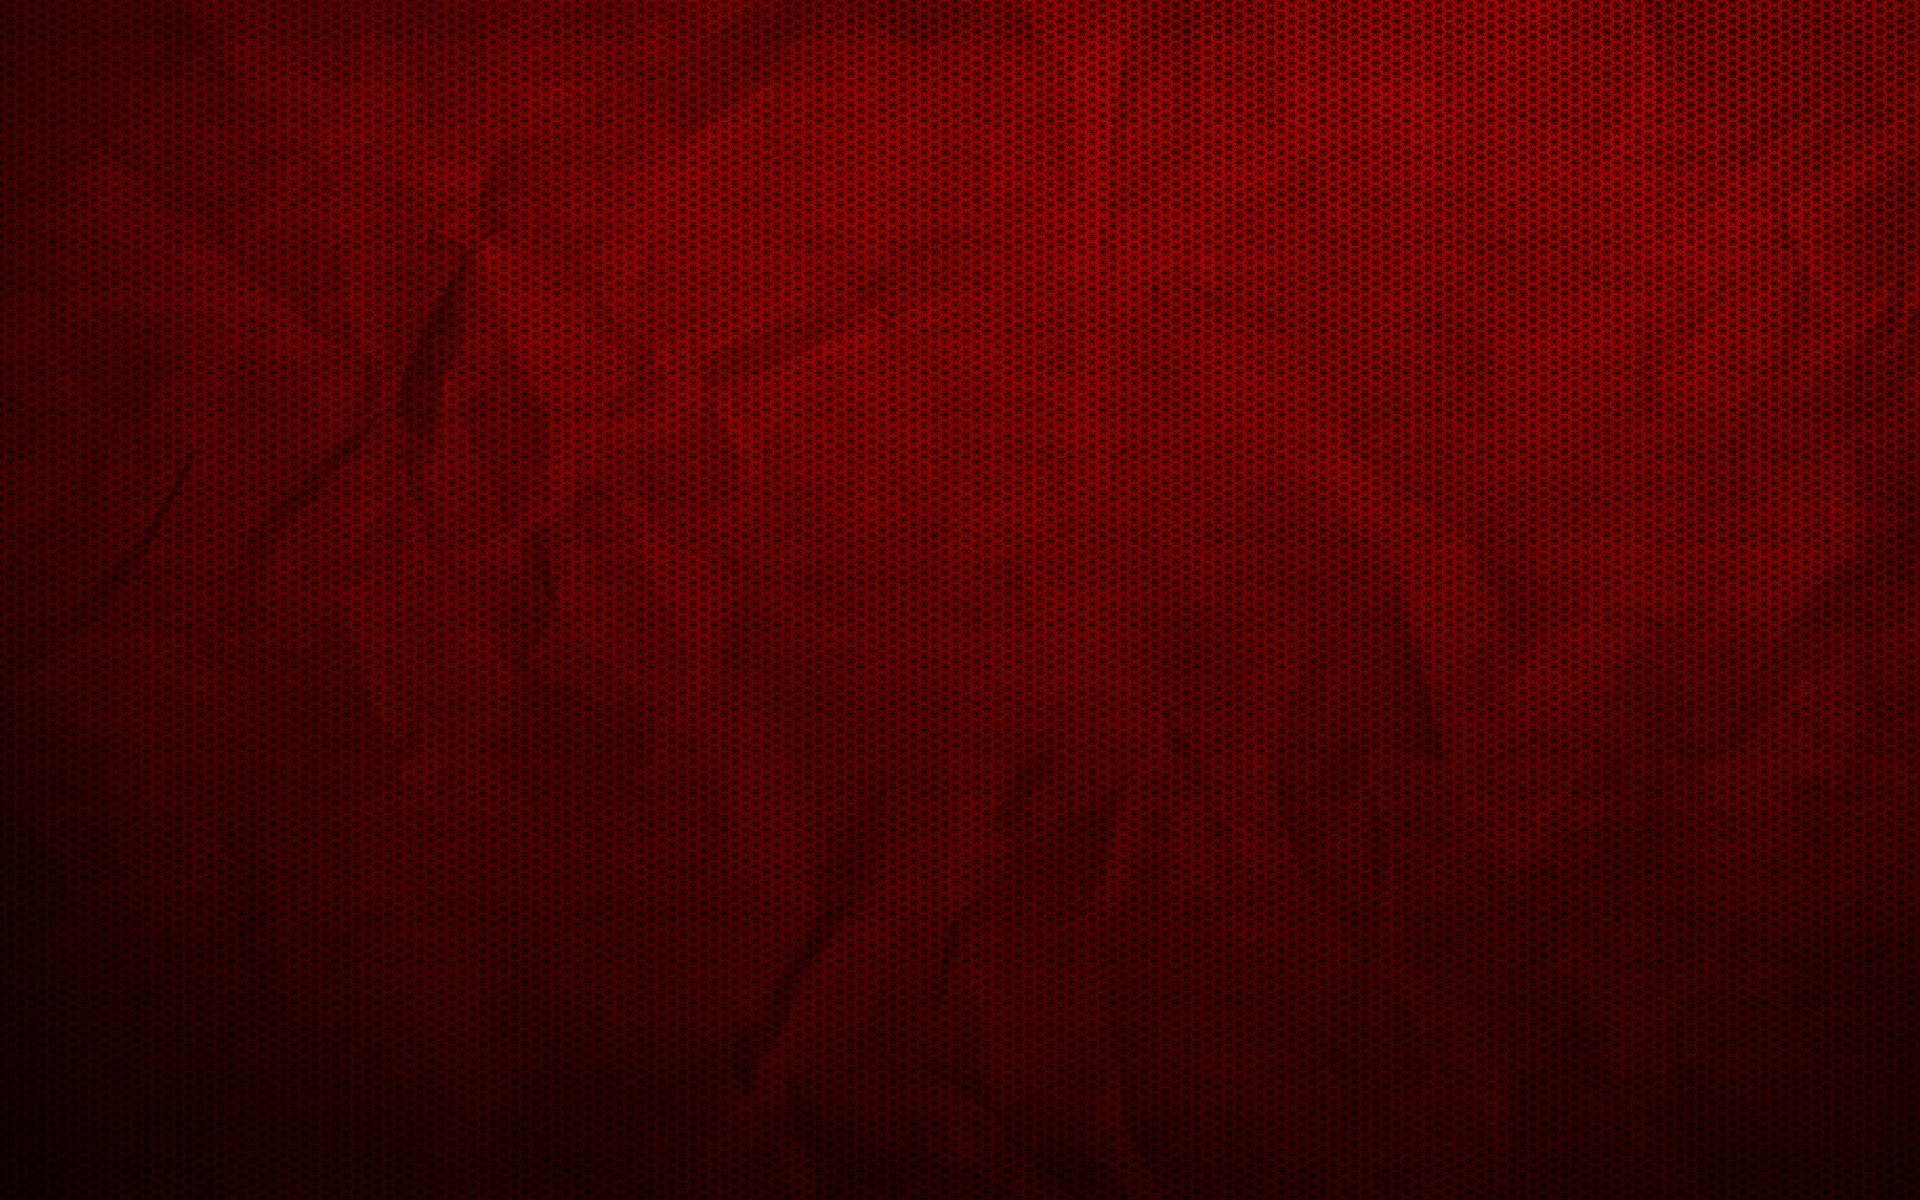 Dark Red Color With Texture Background